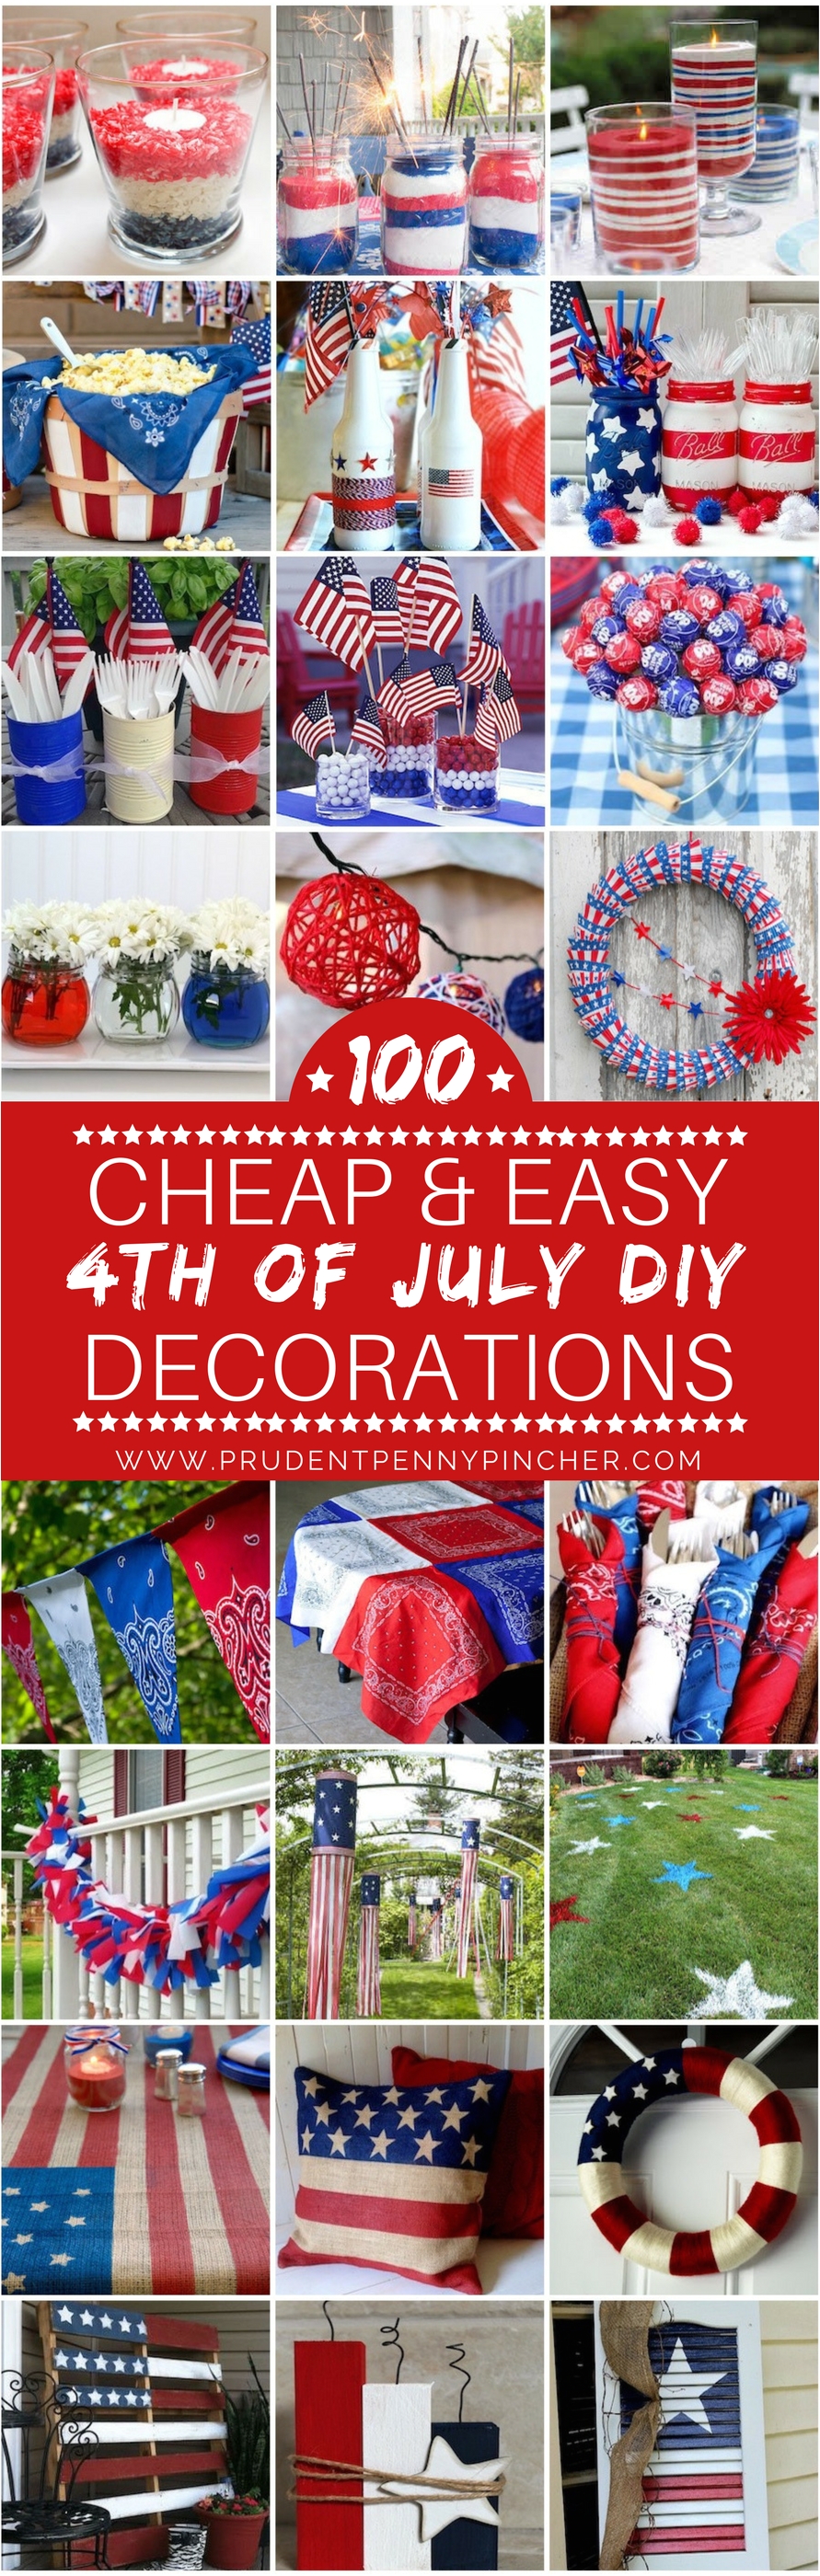 shares check out these creative 4th of july decoration ideas that are easy to make and easy on the wallet these patriotic diy projects are sure to impress